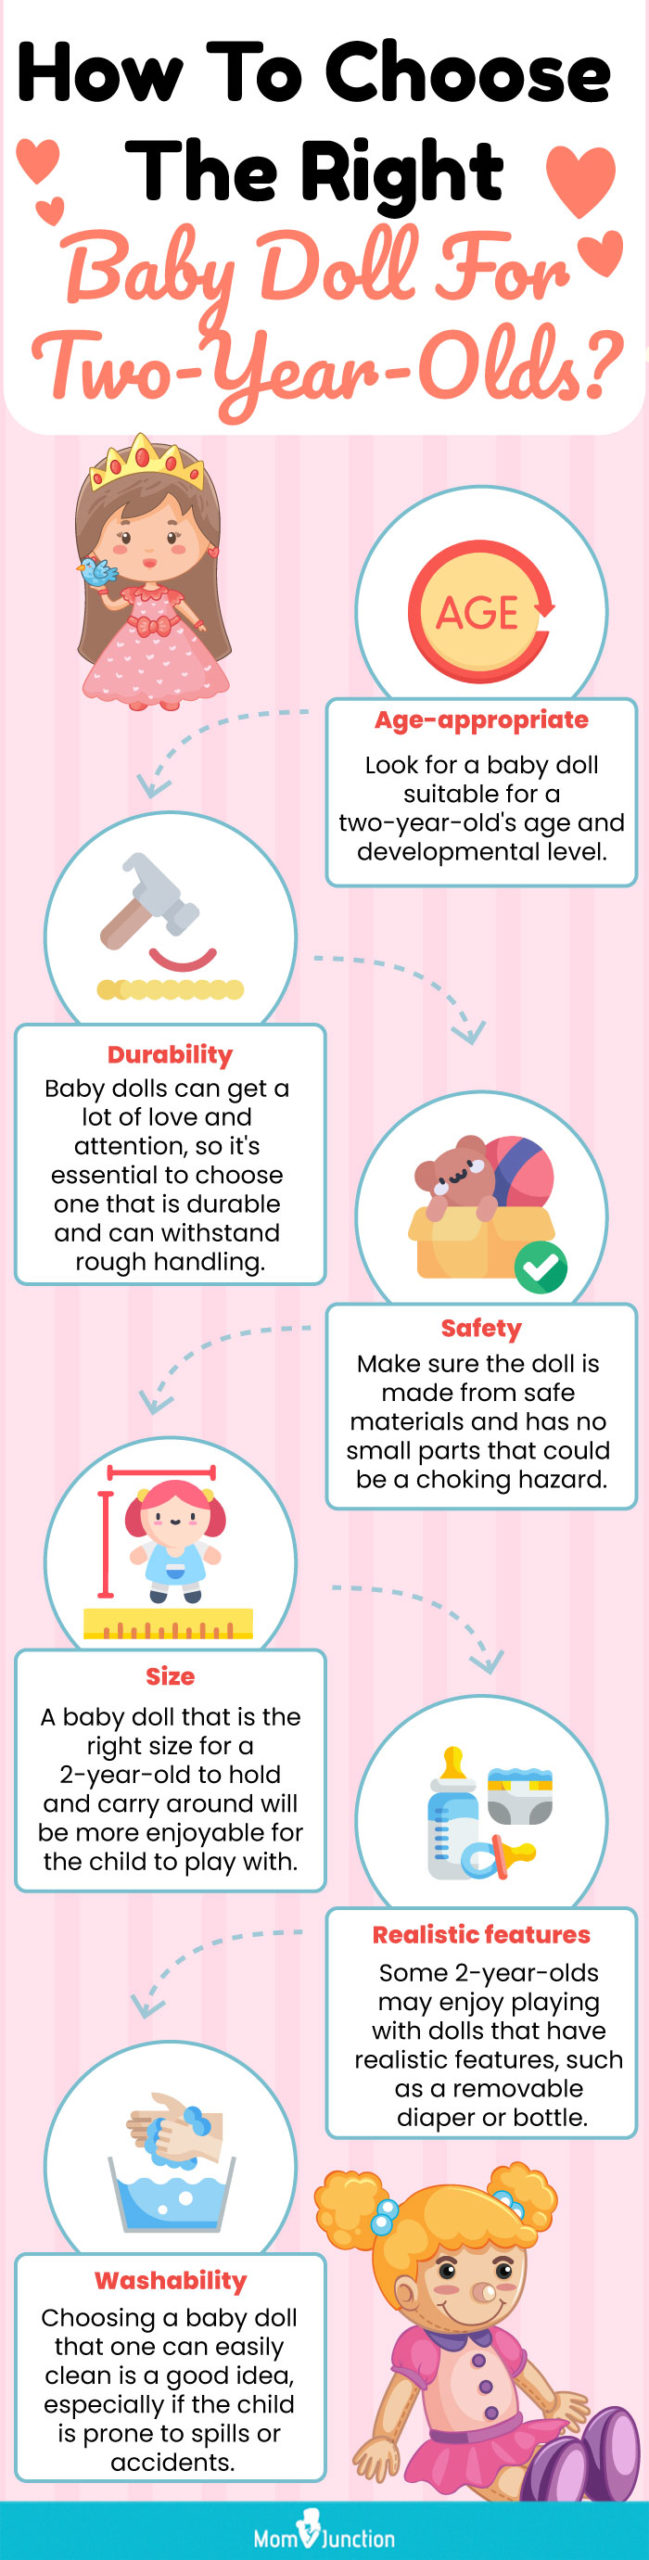 How-To-Choose-The-Right-Baby-Doll-For-Two-Year-Olds (infographic)